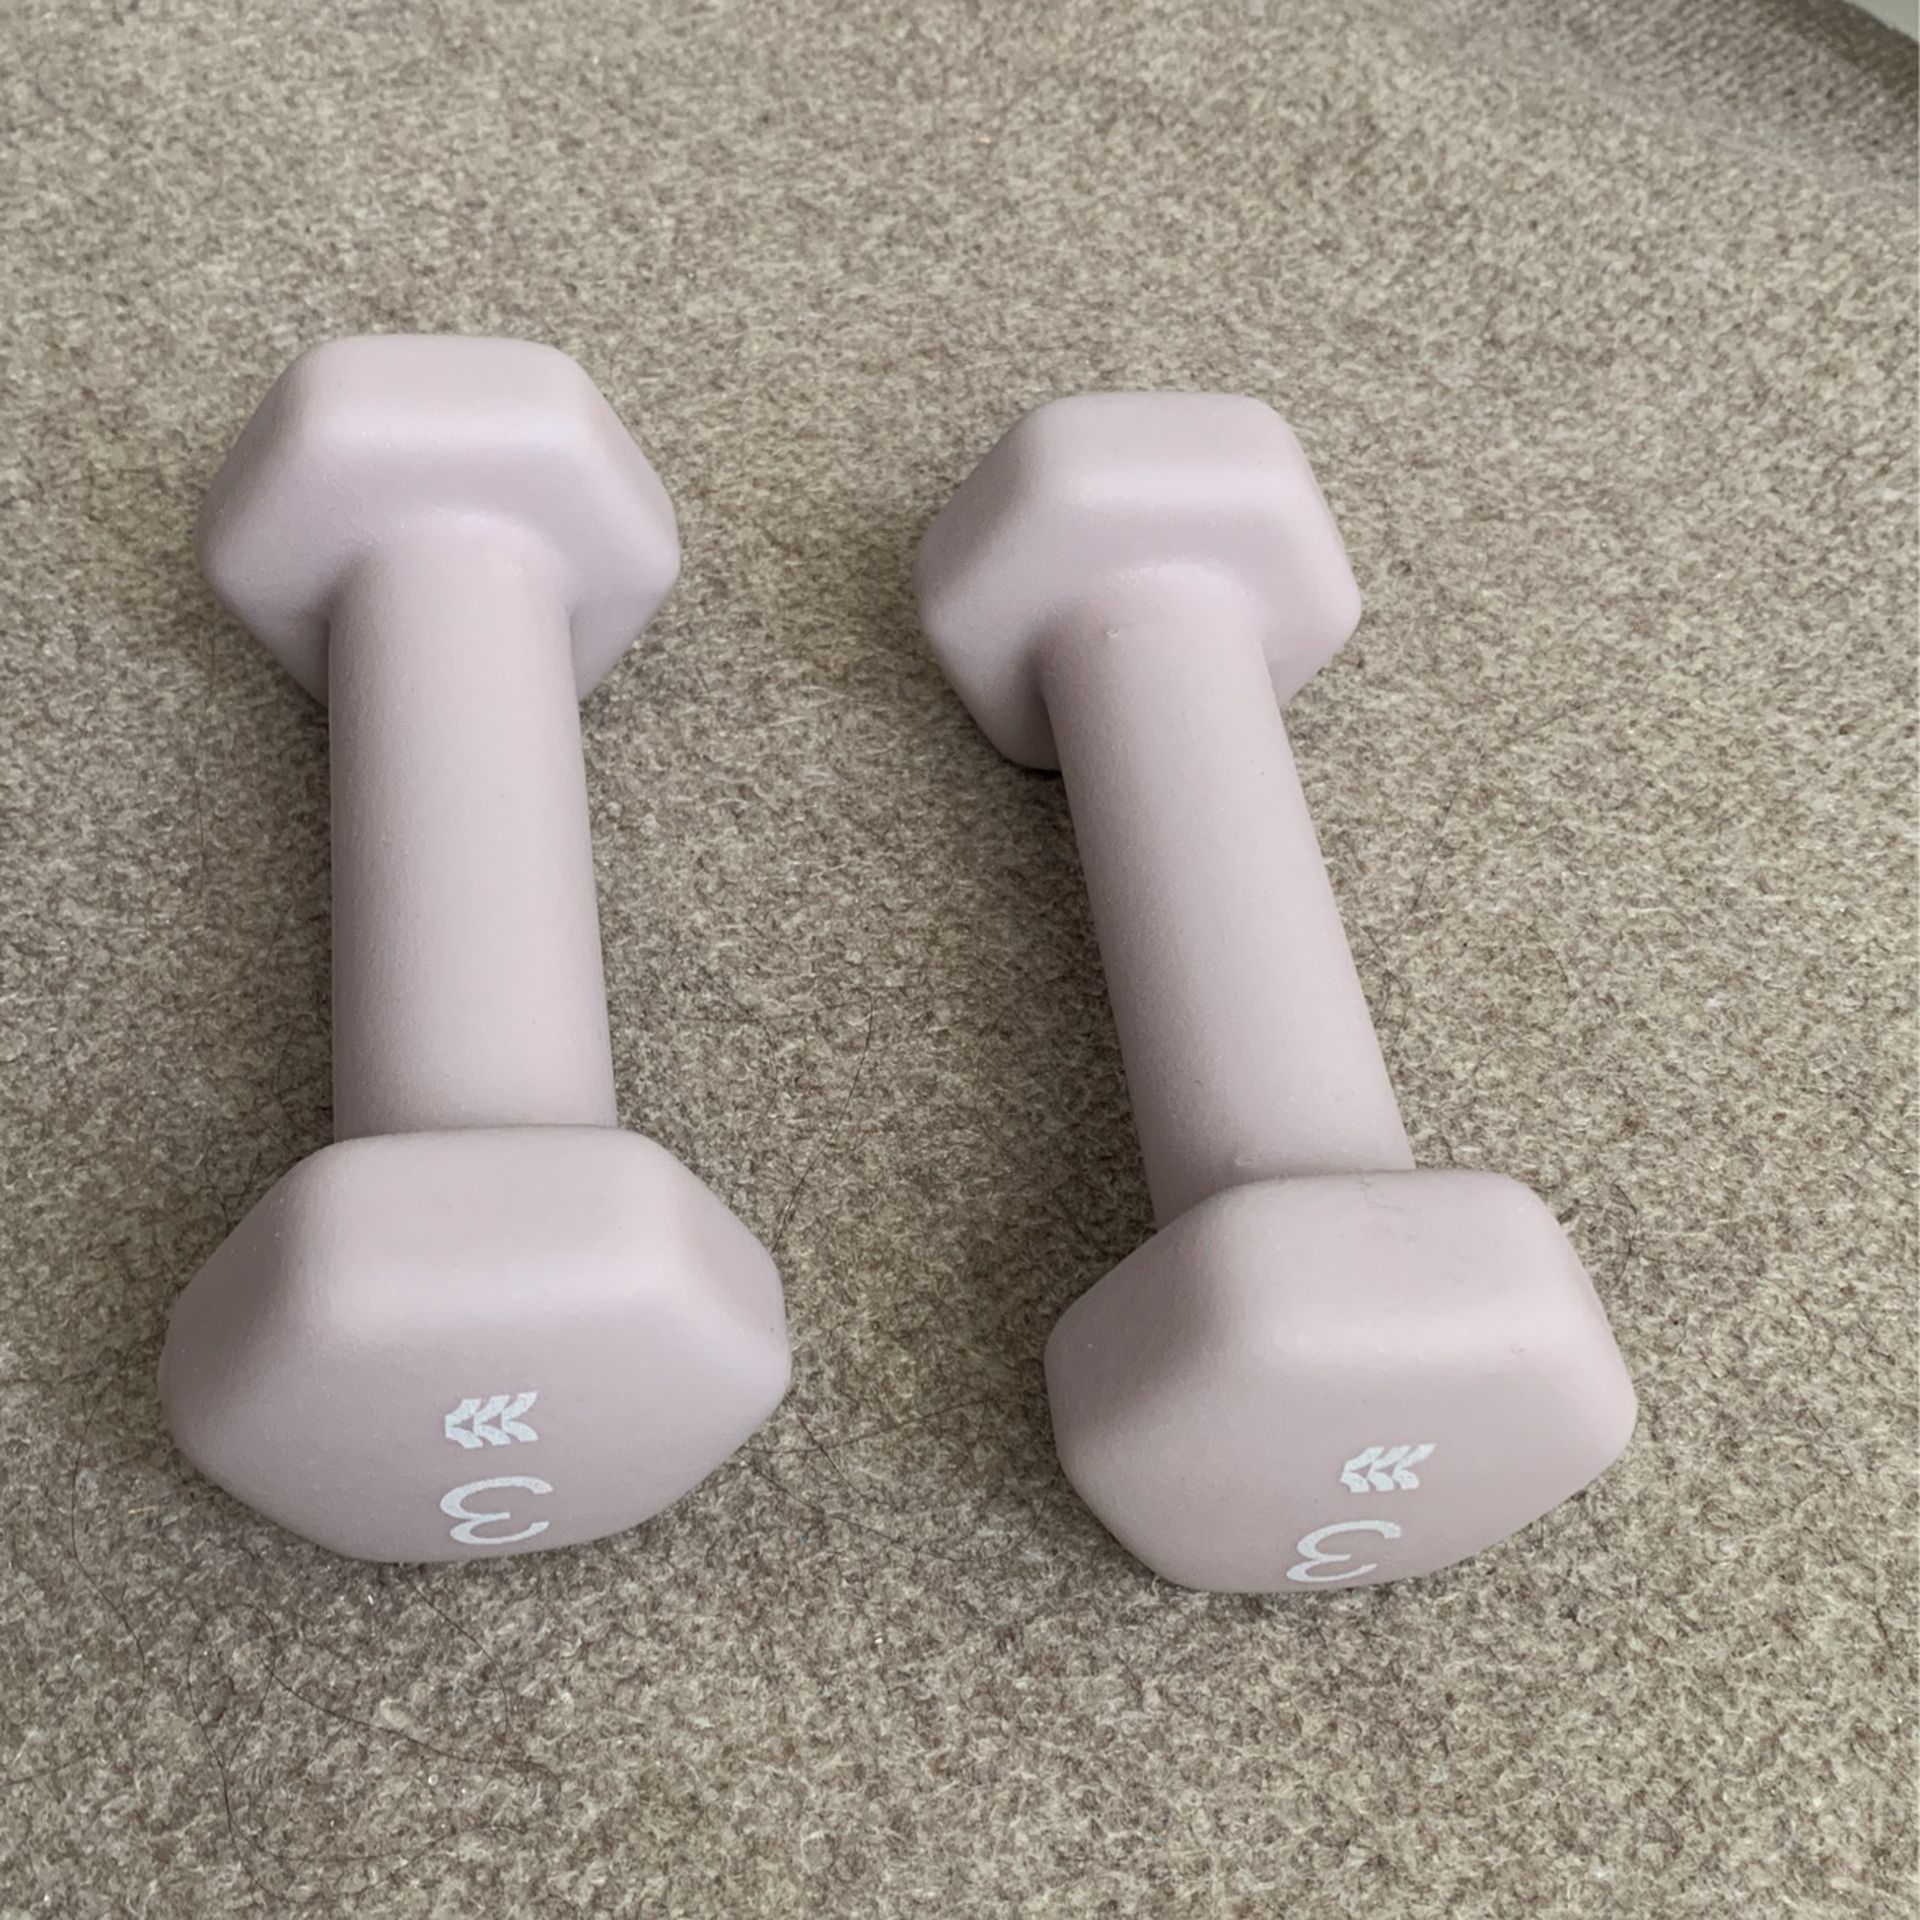 3 Pounds Exercise Hand Weights - 2 Weights